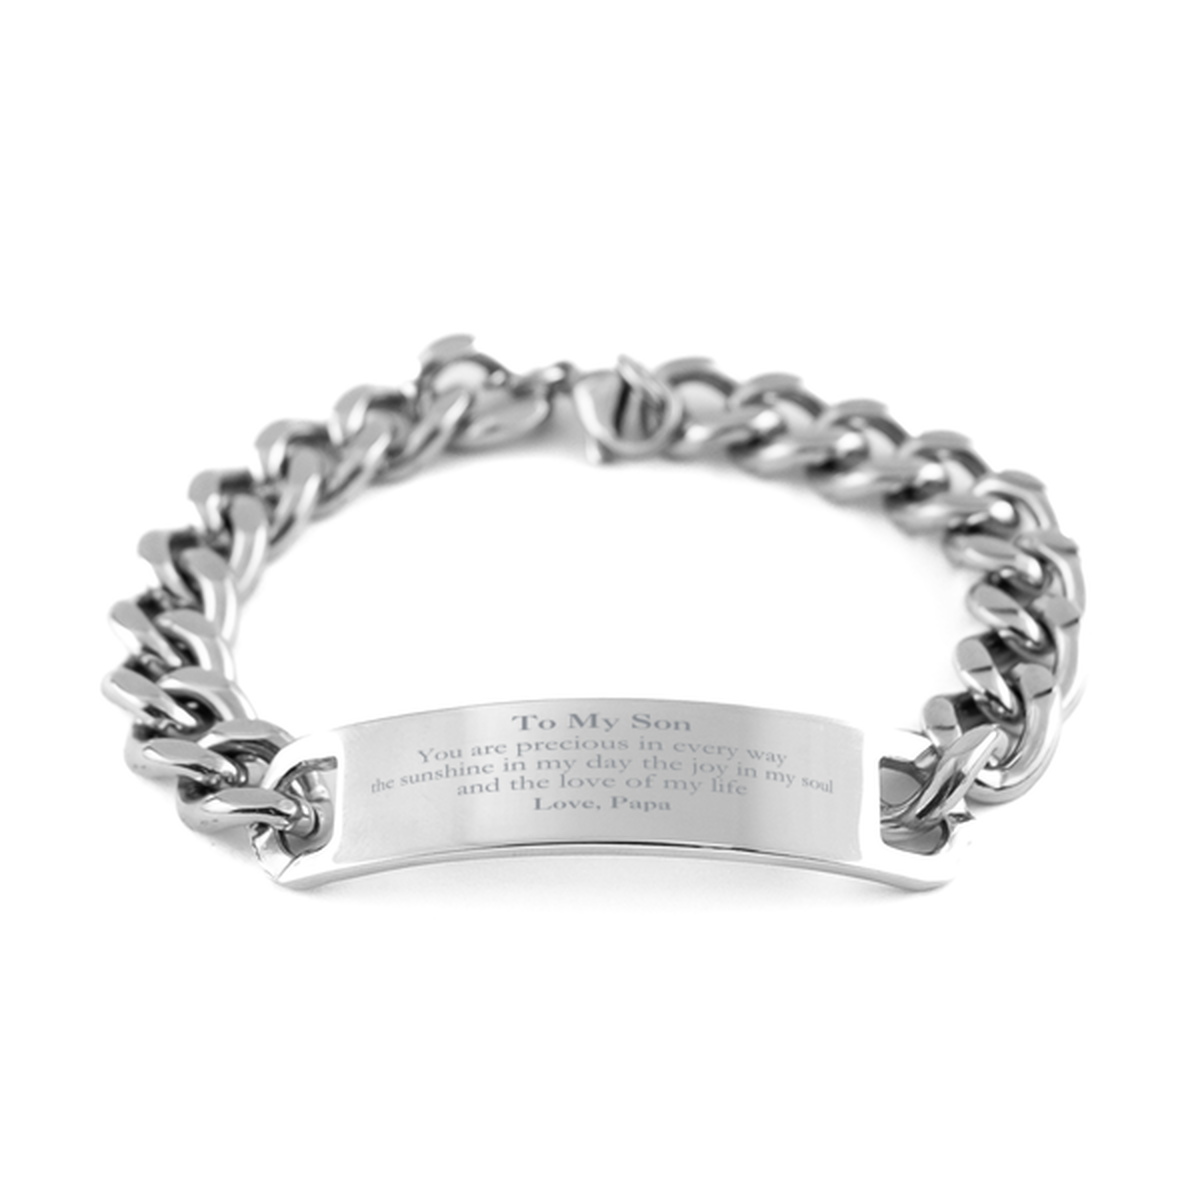 Graduation Gifts for Son Cuban Chain Stainless Steel Bracelet Present from Papa, Christmas Son Birthday Gifts Son You are precious in every way the sunshine in my day. Love, Papa